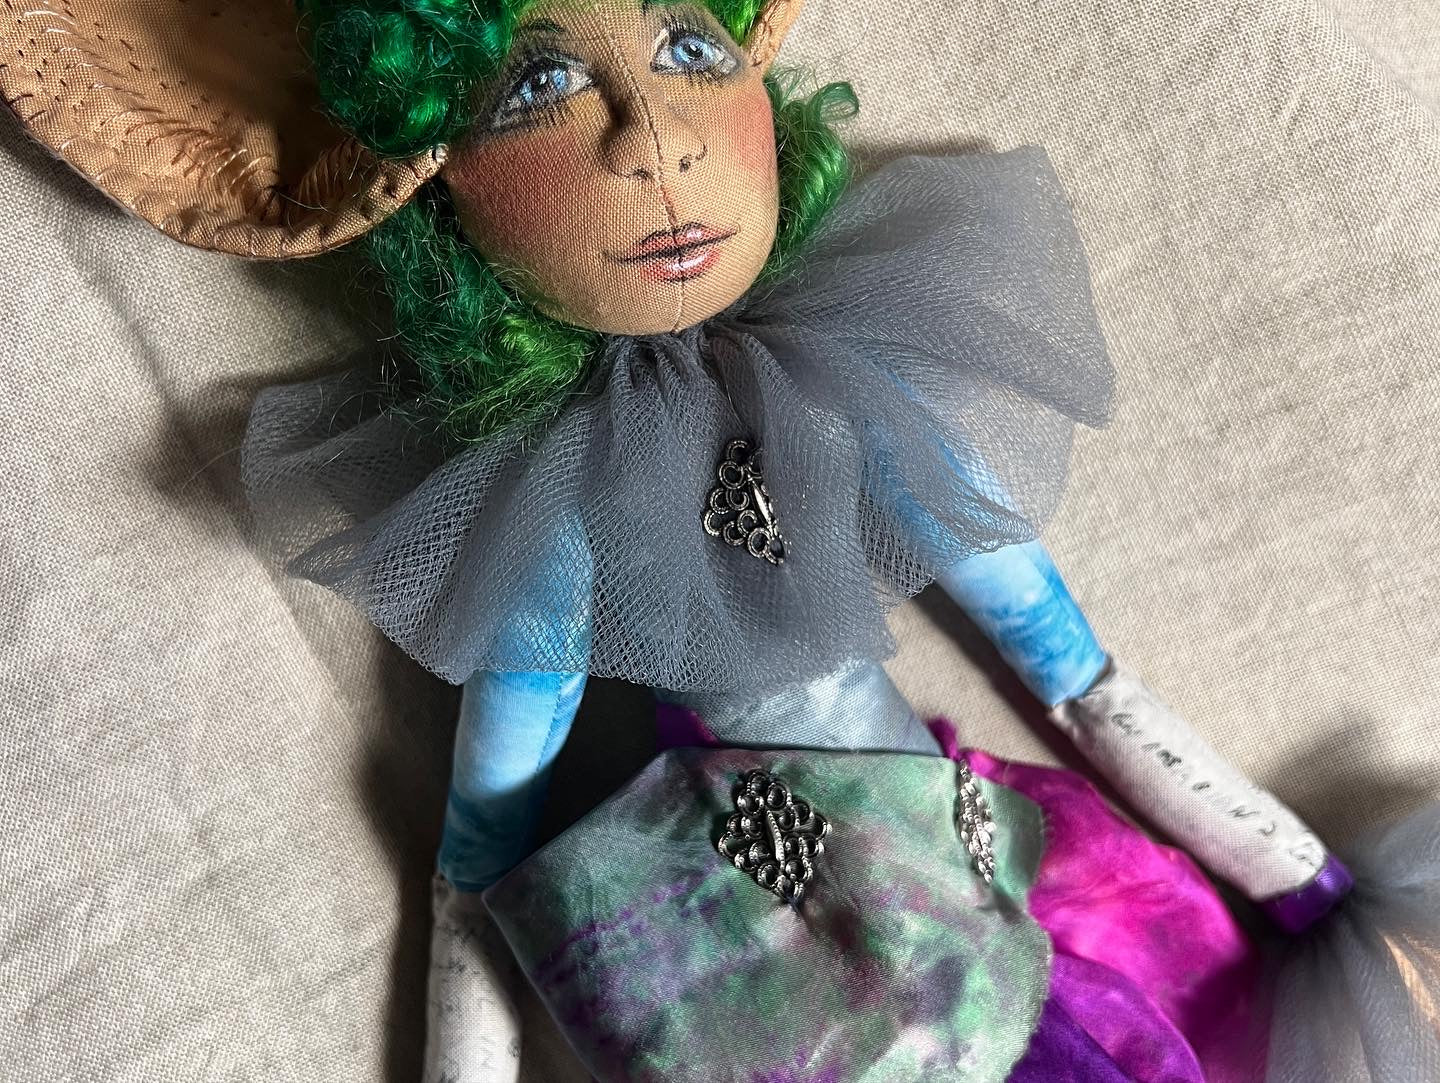 HINDY a cloth doll made by Jan Horrox